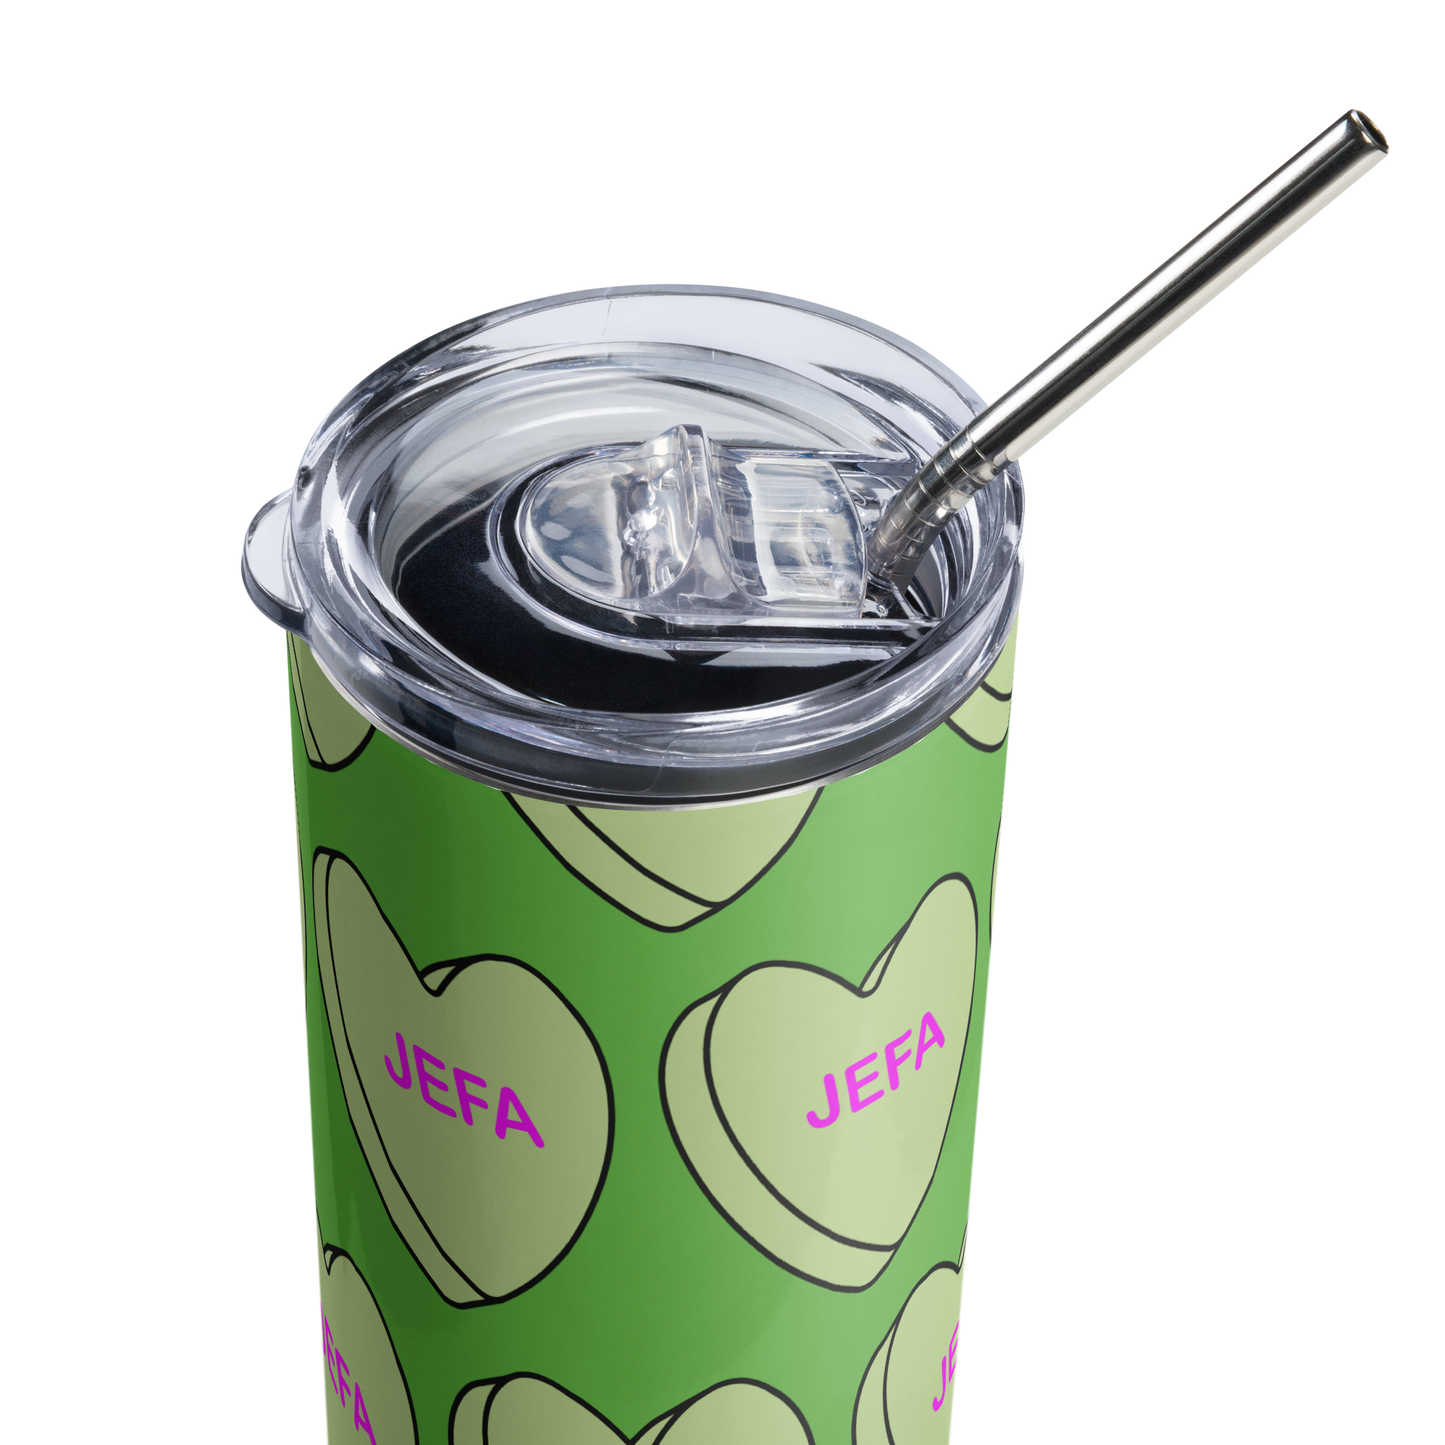 Jefa Candy Conversation Heart - Stainless steel tumbler